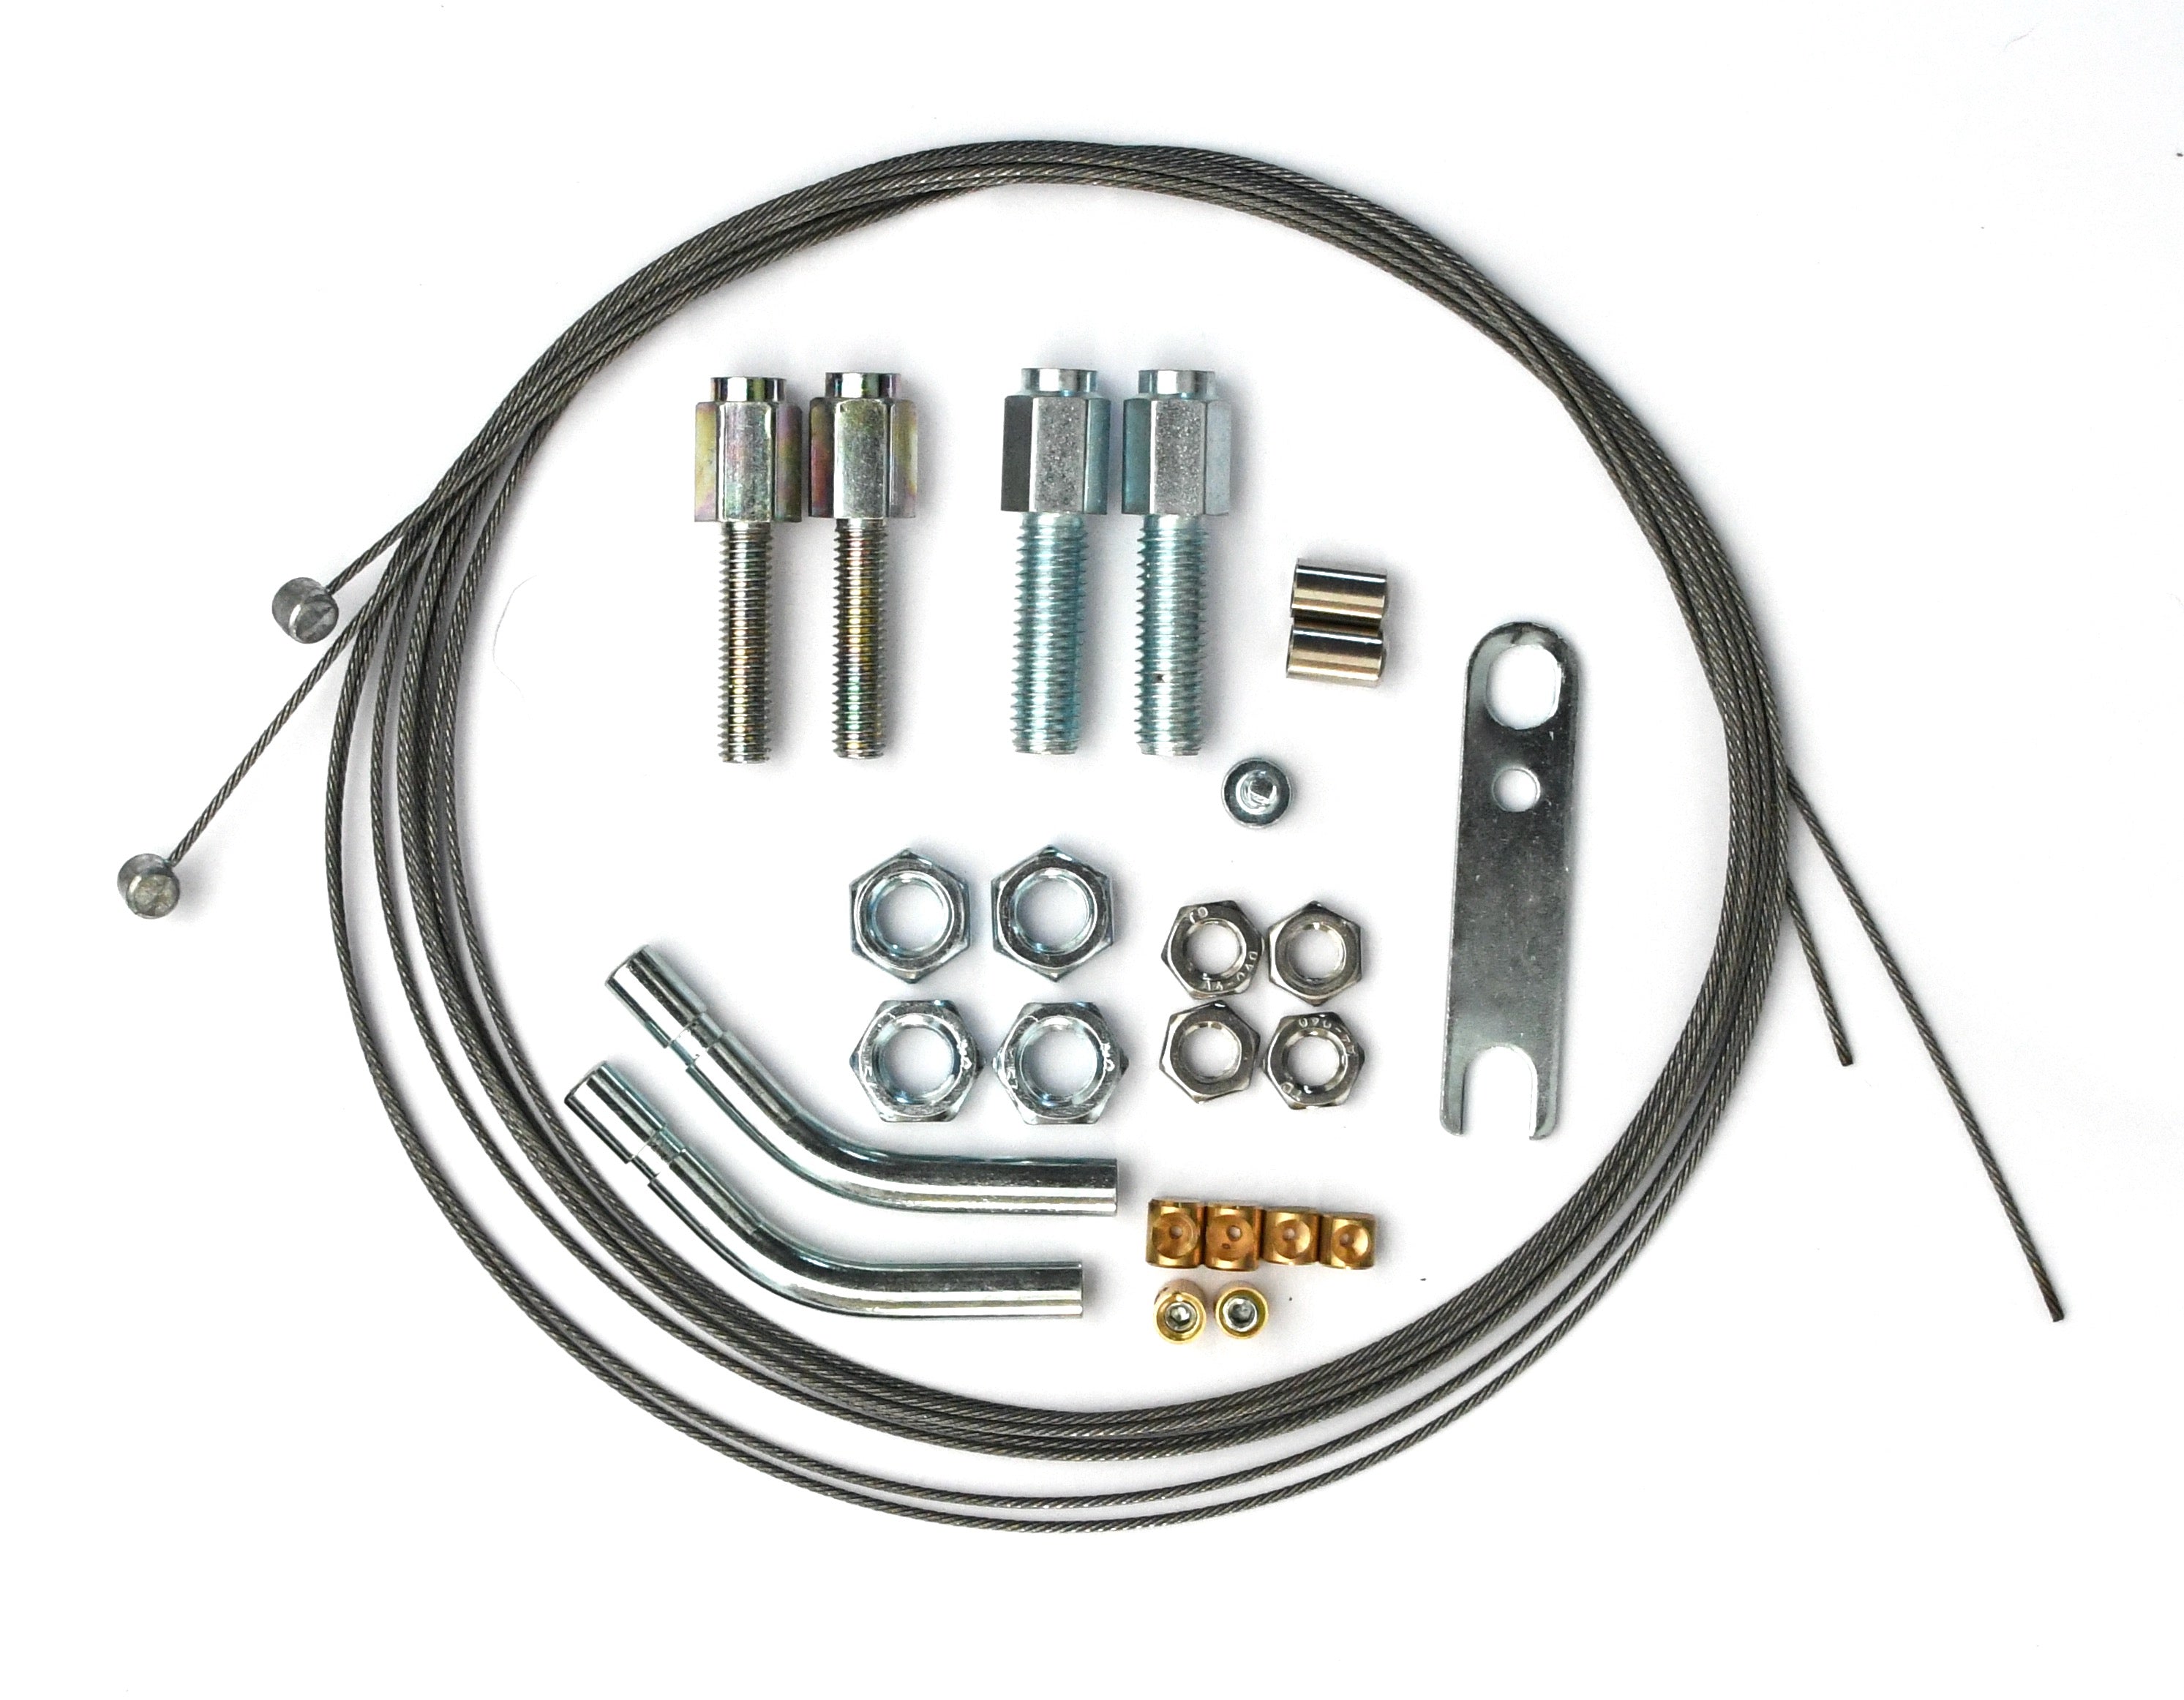 Venhill Universal Throttle Cable Kit for Domino XM2 Throttle 2M